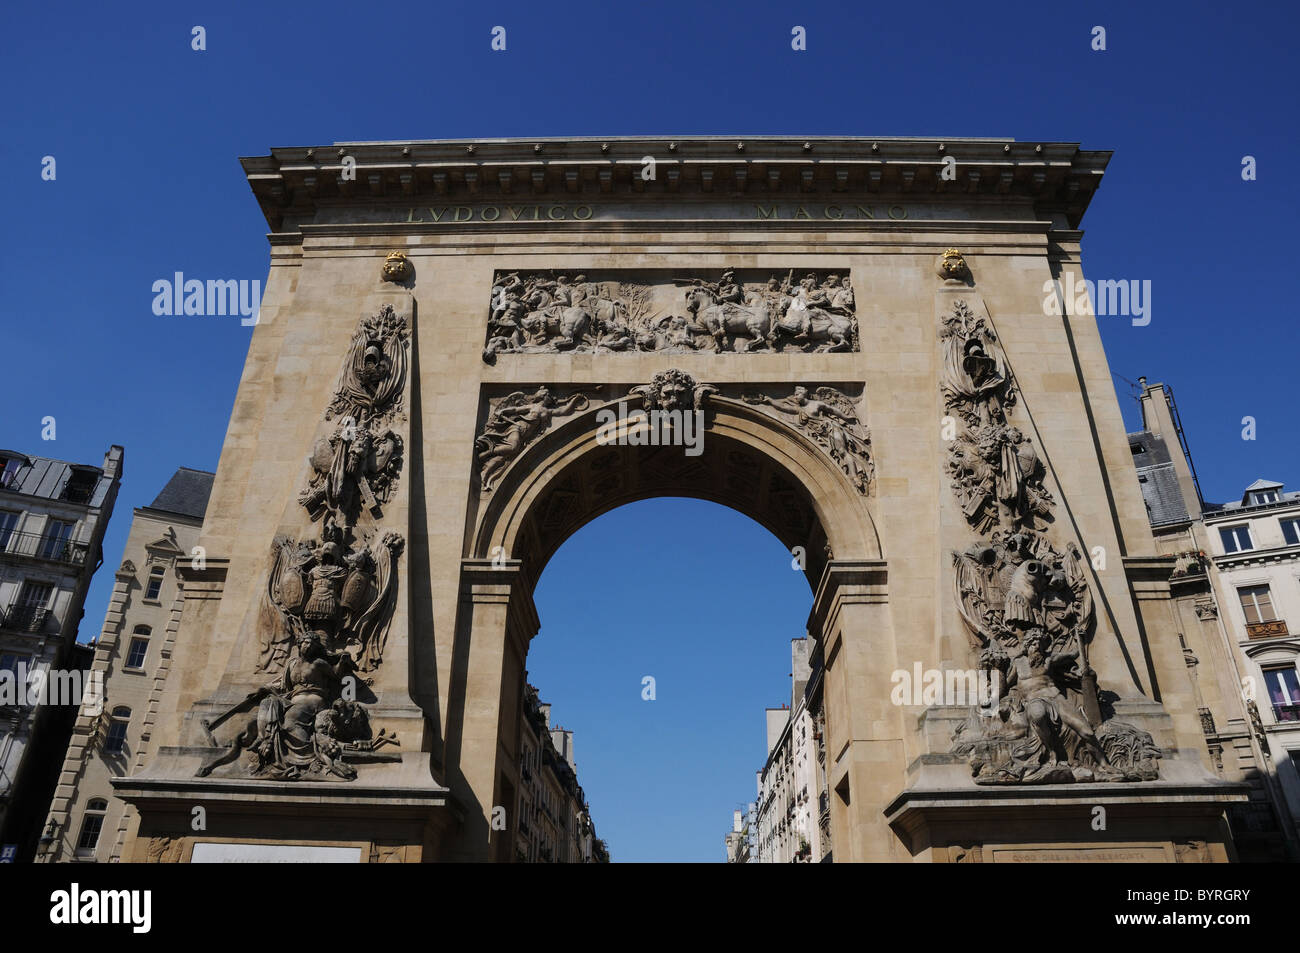 St denis paris hi-res stock photography and images - Alamy